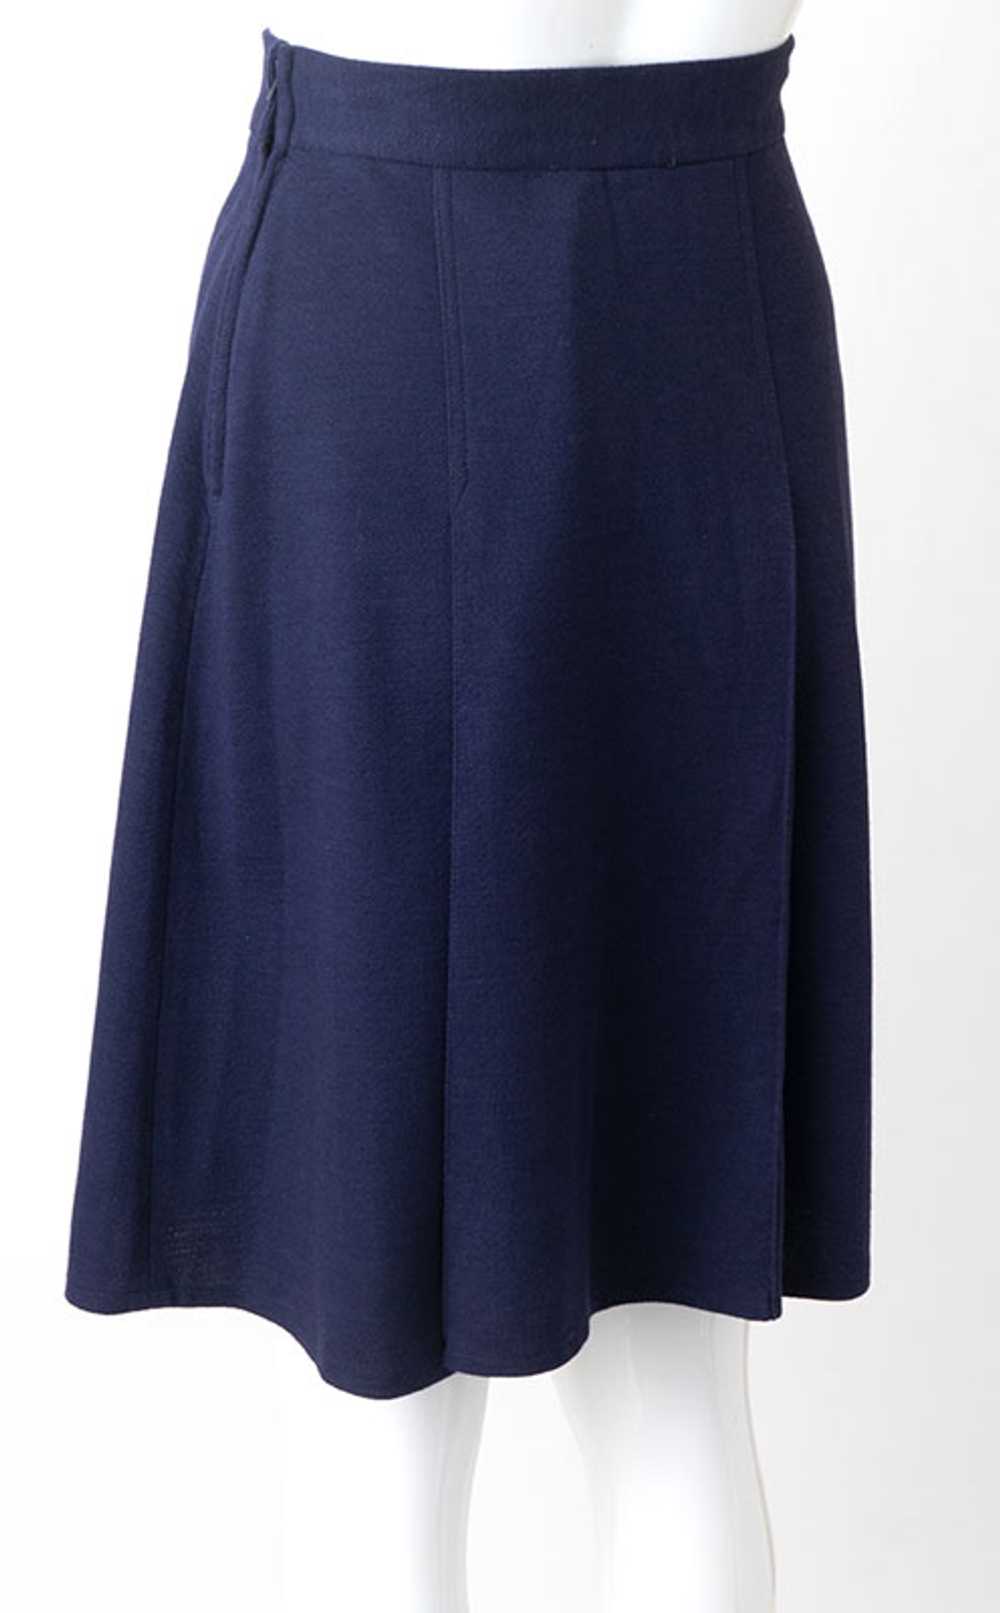 Chic 1970s Boutique Skirt - image 3